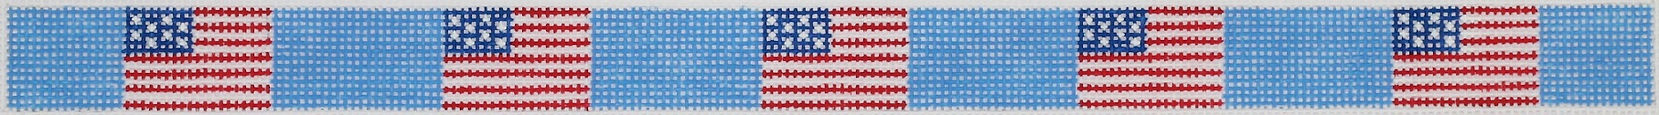 Sunglass Strap – American Flags on Bright Blue